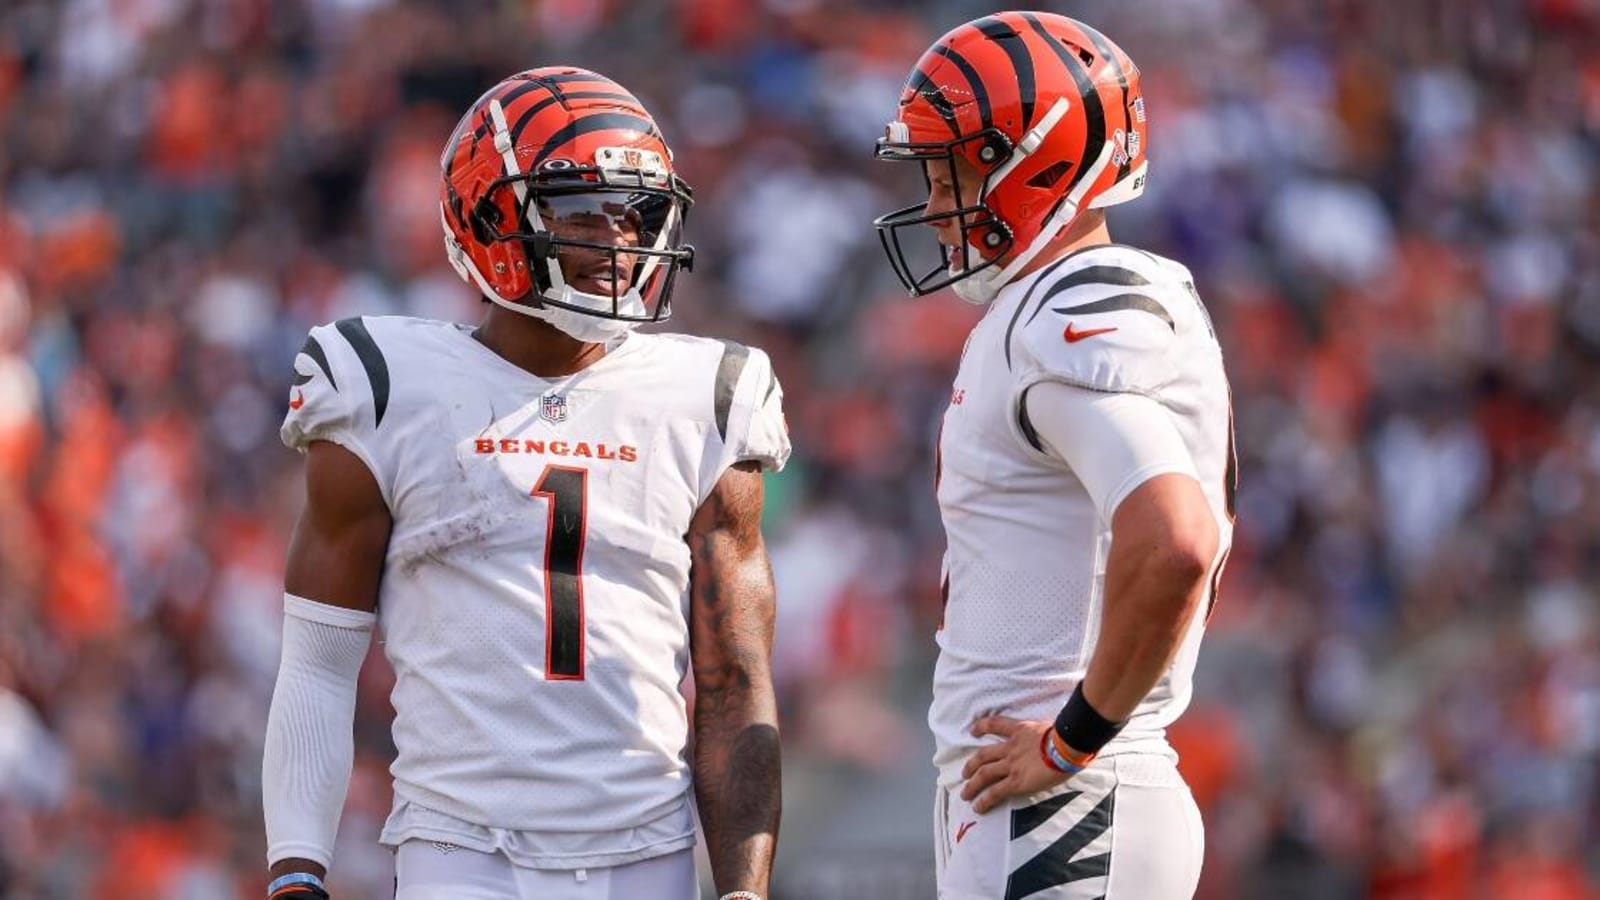 Bengals WR Ja'Marr Chase: 'I'm always (expletive) open'